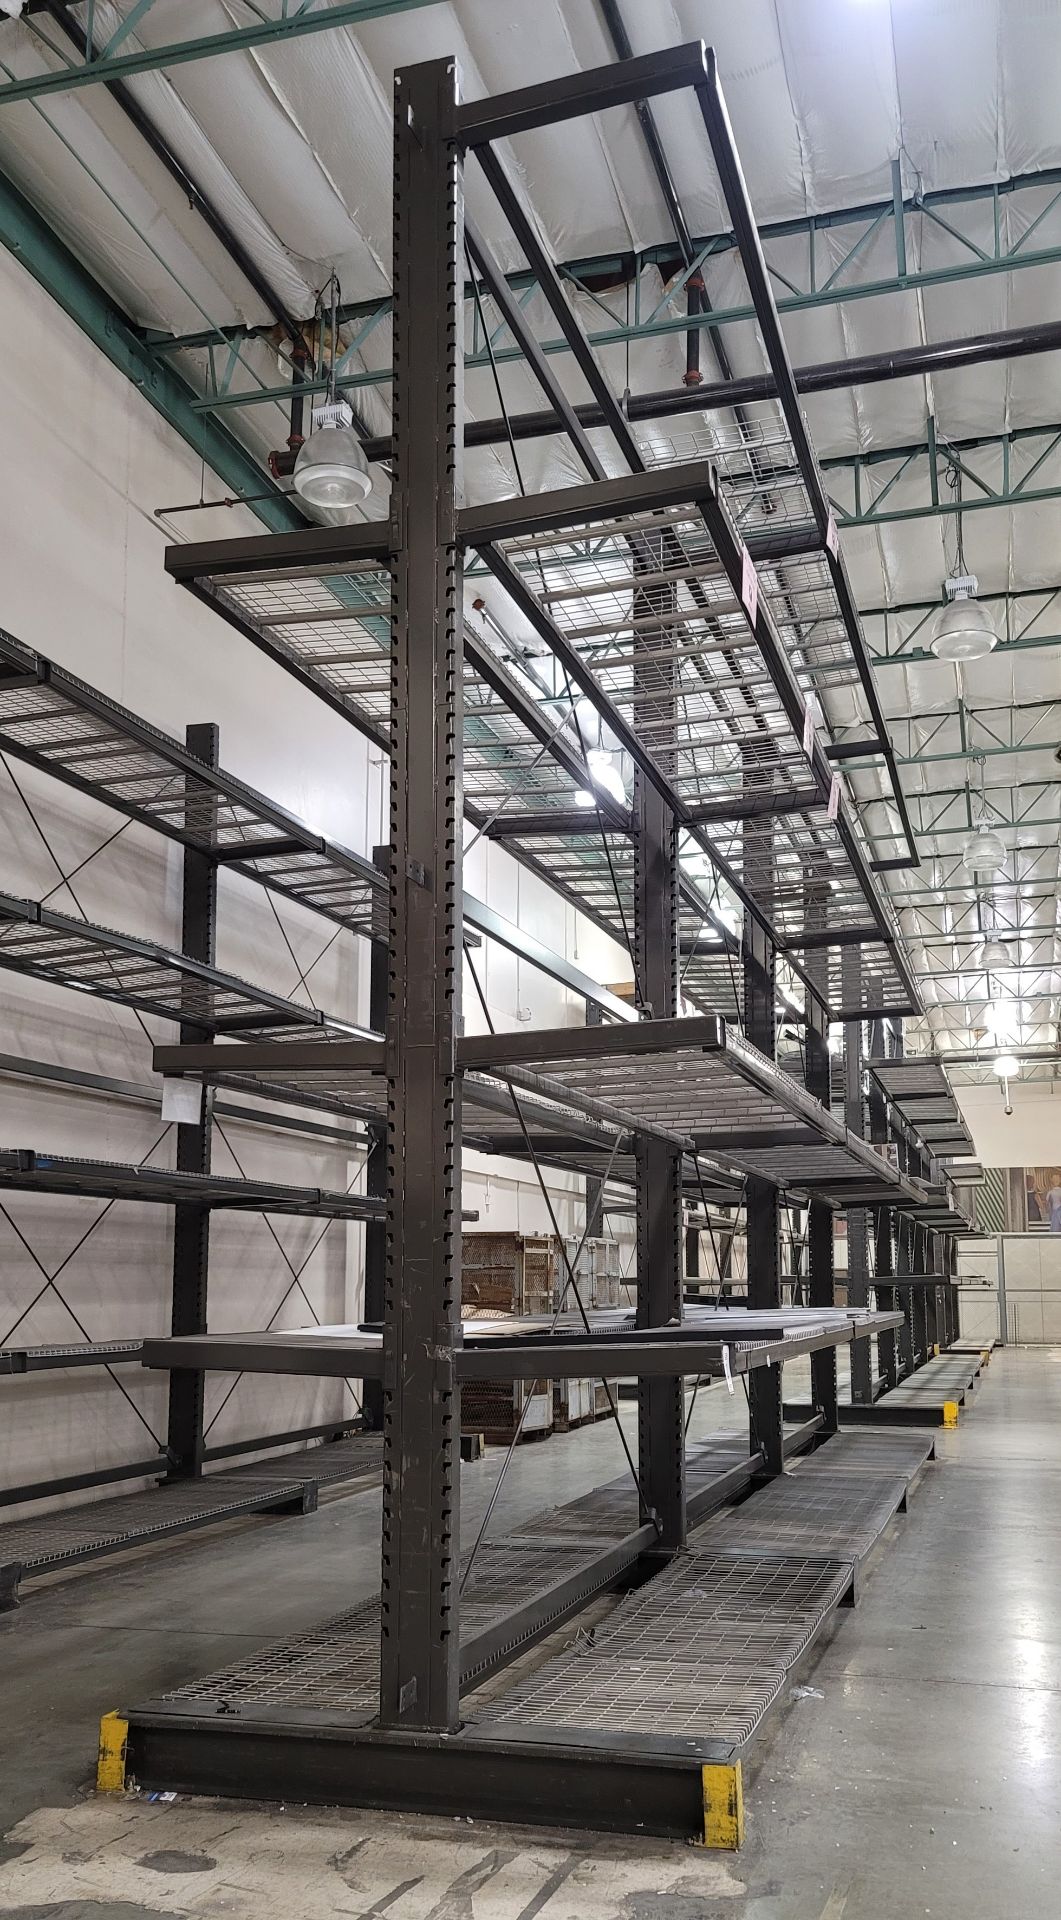 LOT - (3) 12' SECTIONS OF CANTILEVER PALLET RACK, 2-SIDED, 20' HT, WIRE DECKING